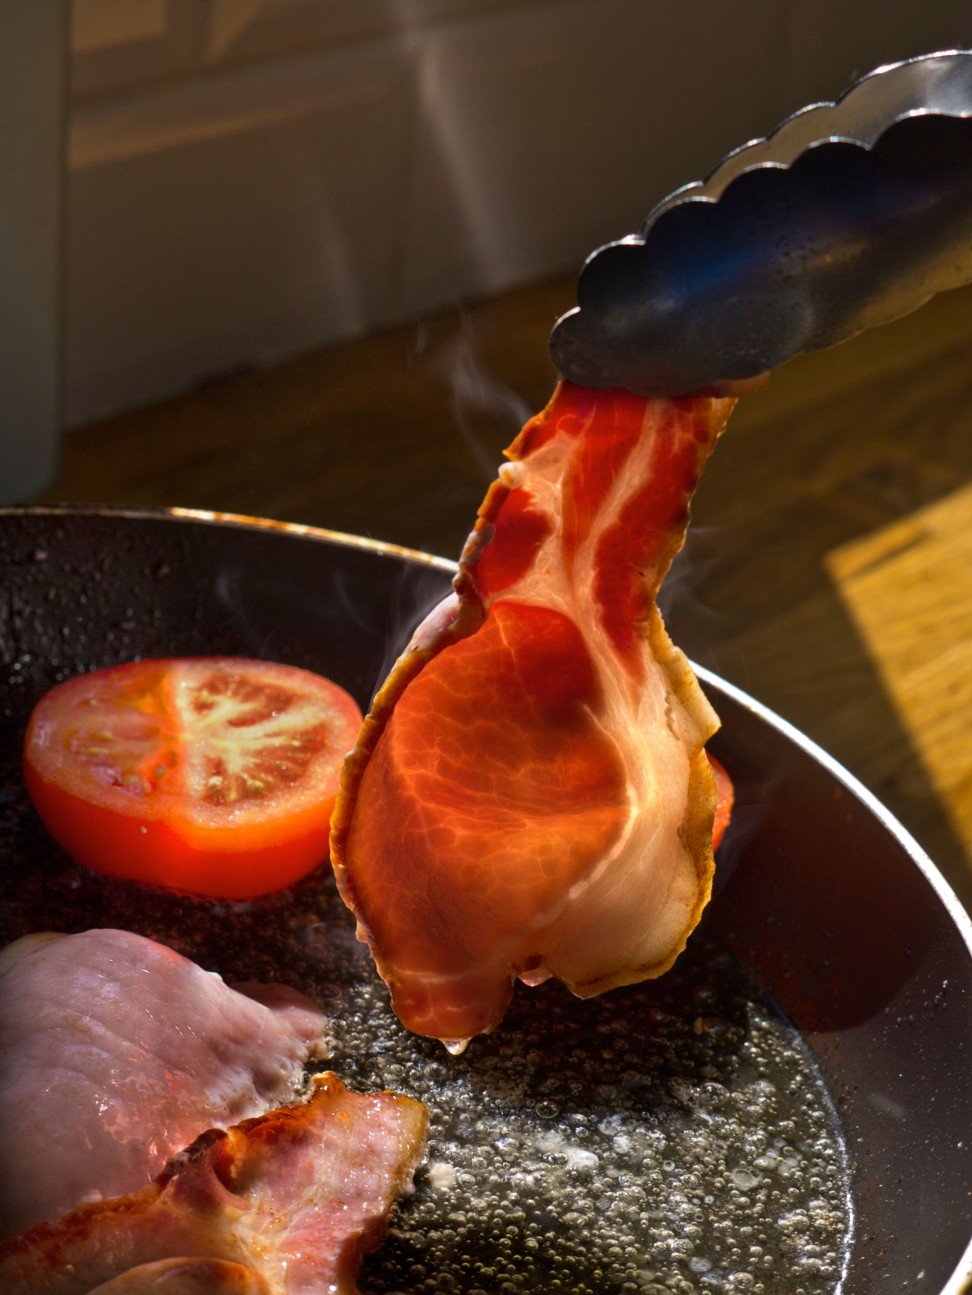 Processed meat includes sausages, bacon and ham. Photo: Alamy